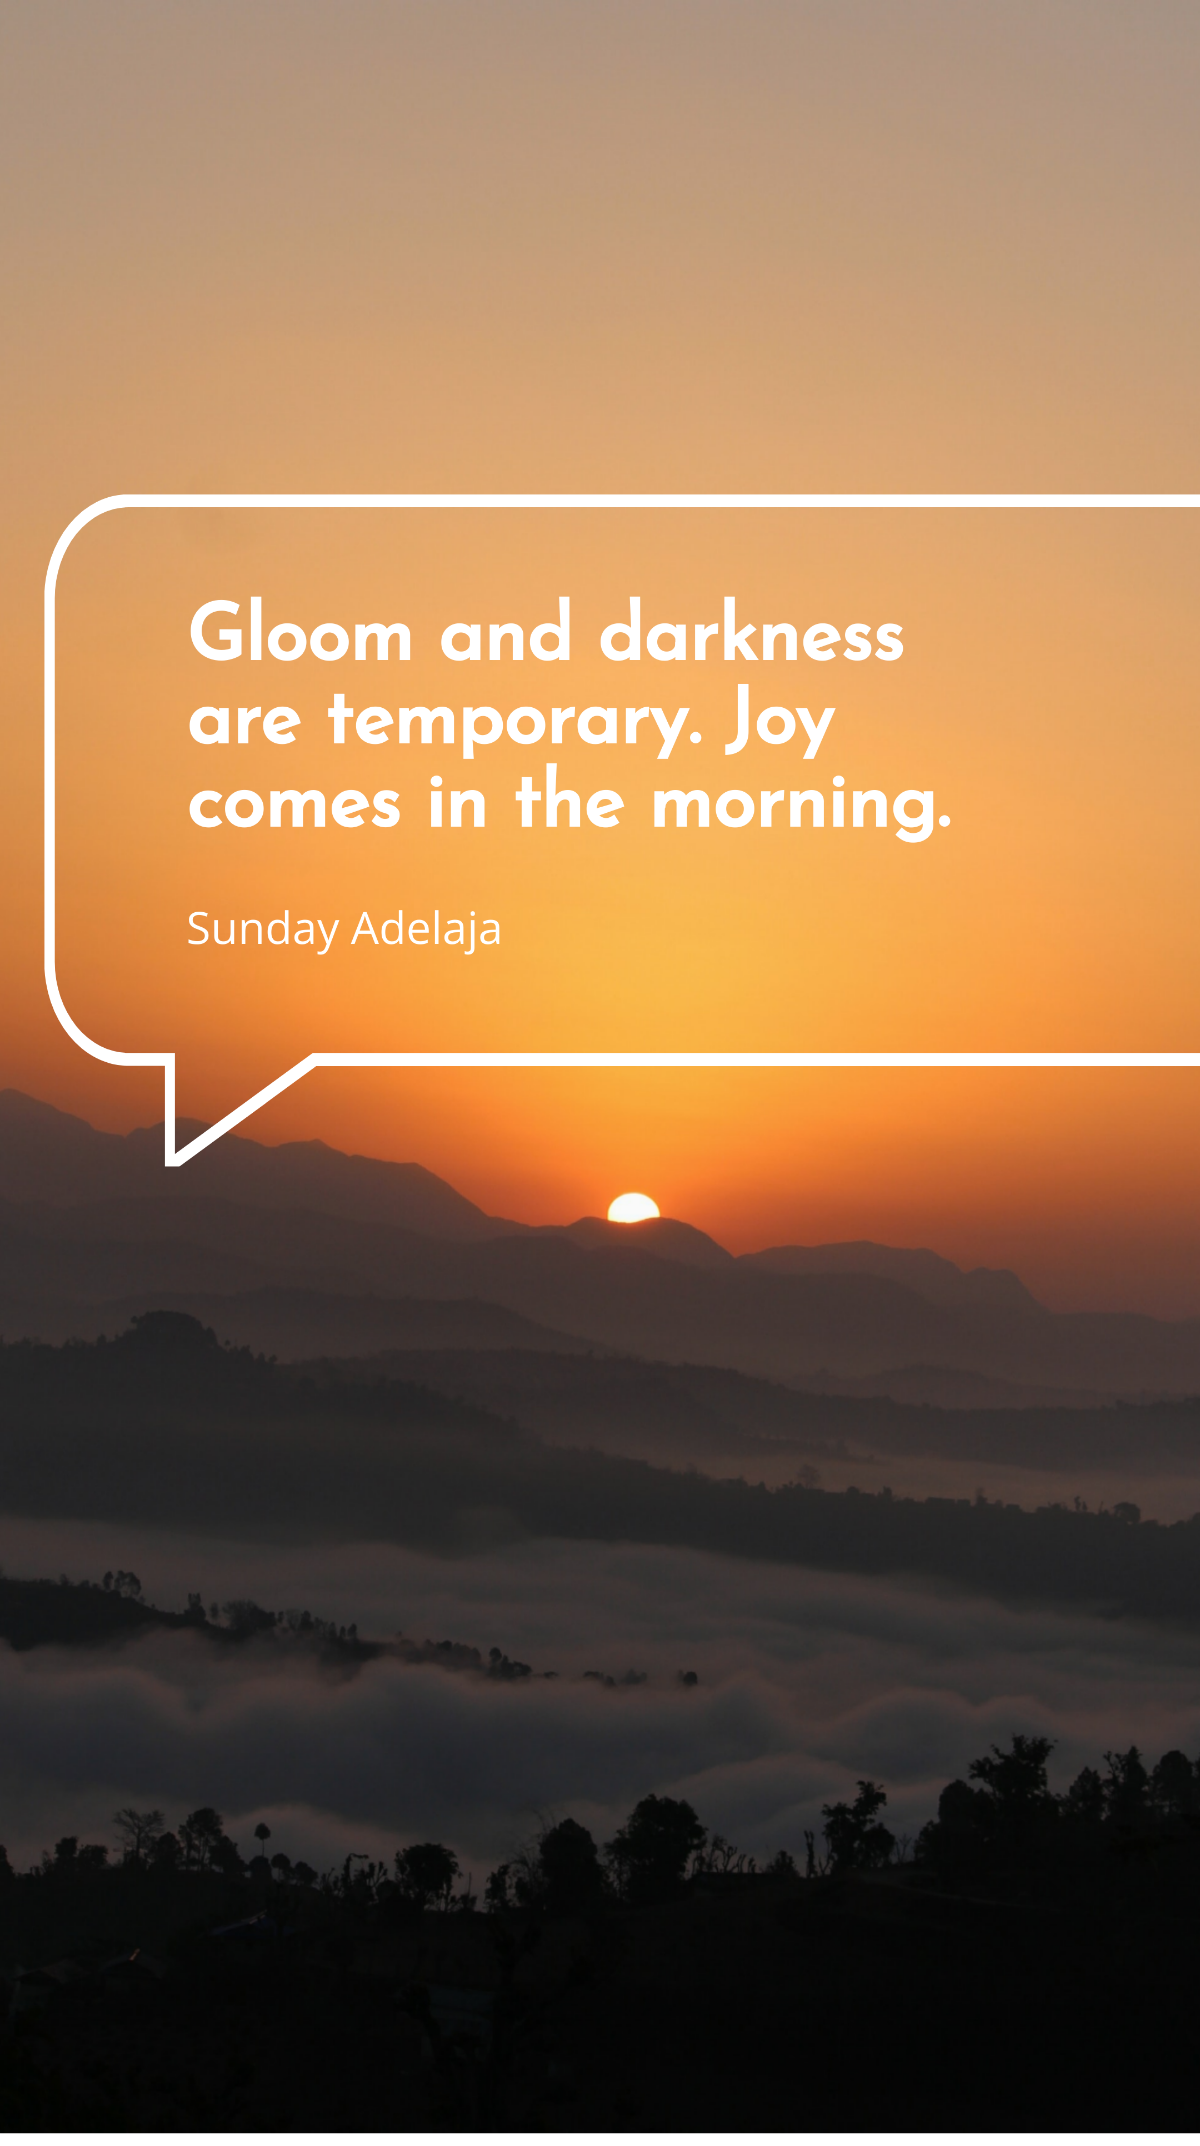 Sunday Adelaja - Gloom and darkness are temporary. Joy comes in the morning. Template